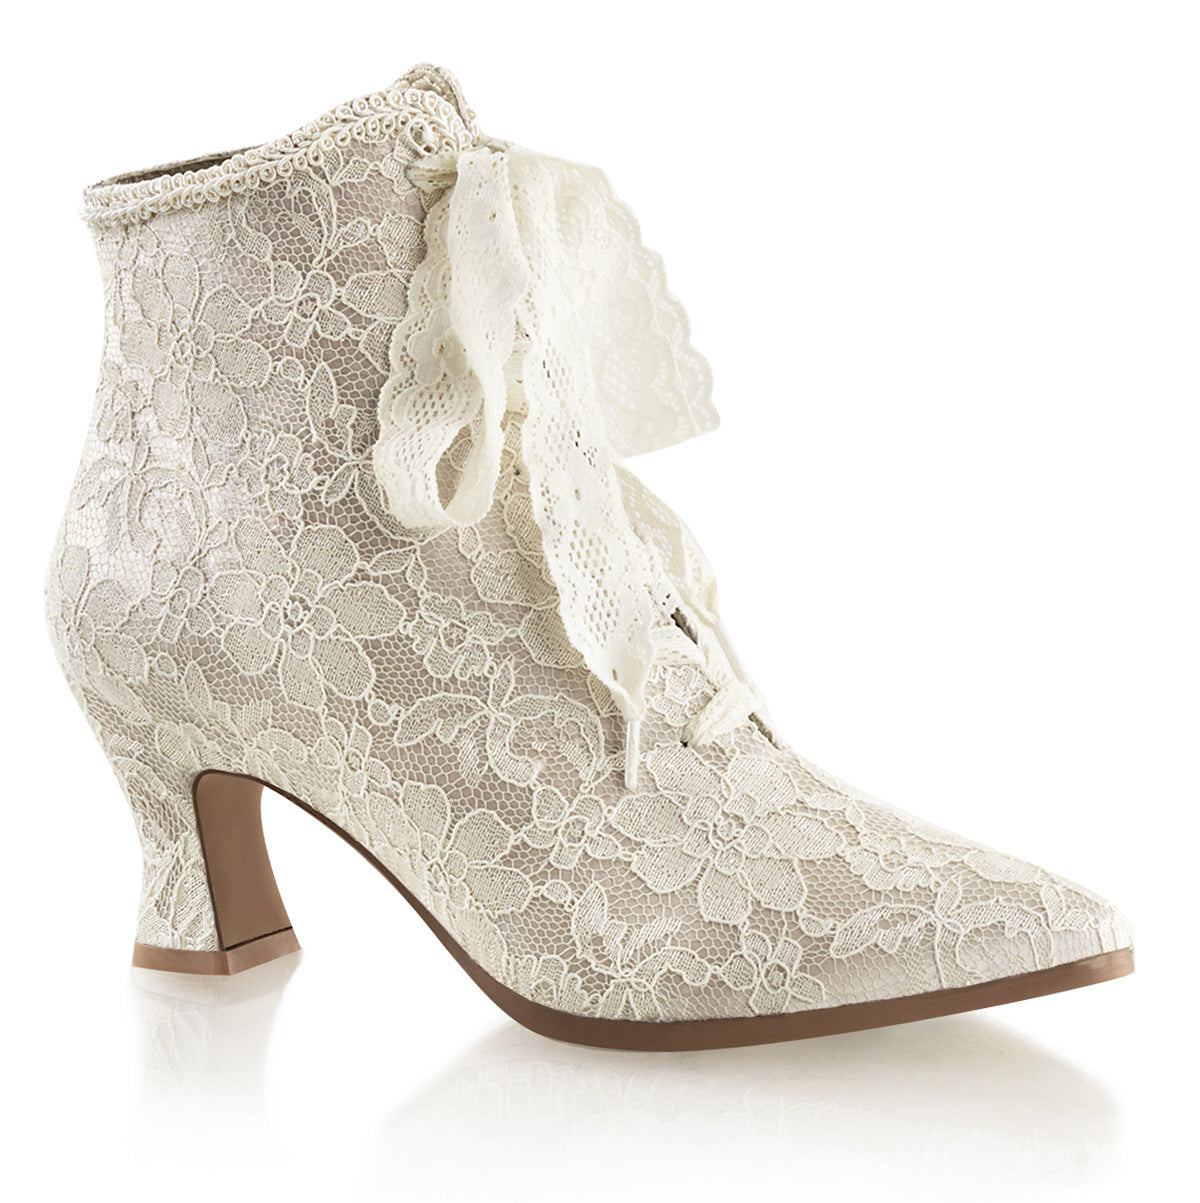 VICTORIAN-30 Fabulicious 3 Inch Heel Champaign Satin Lace Boots